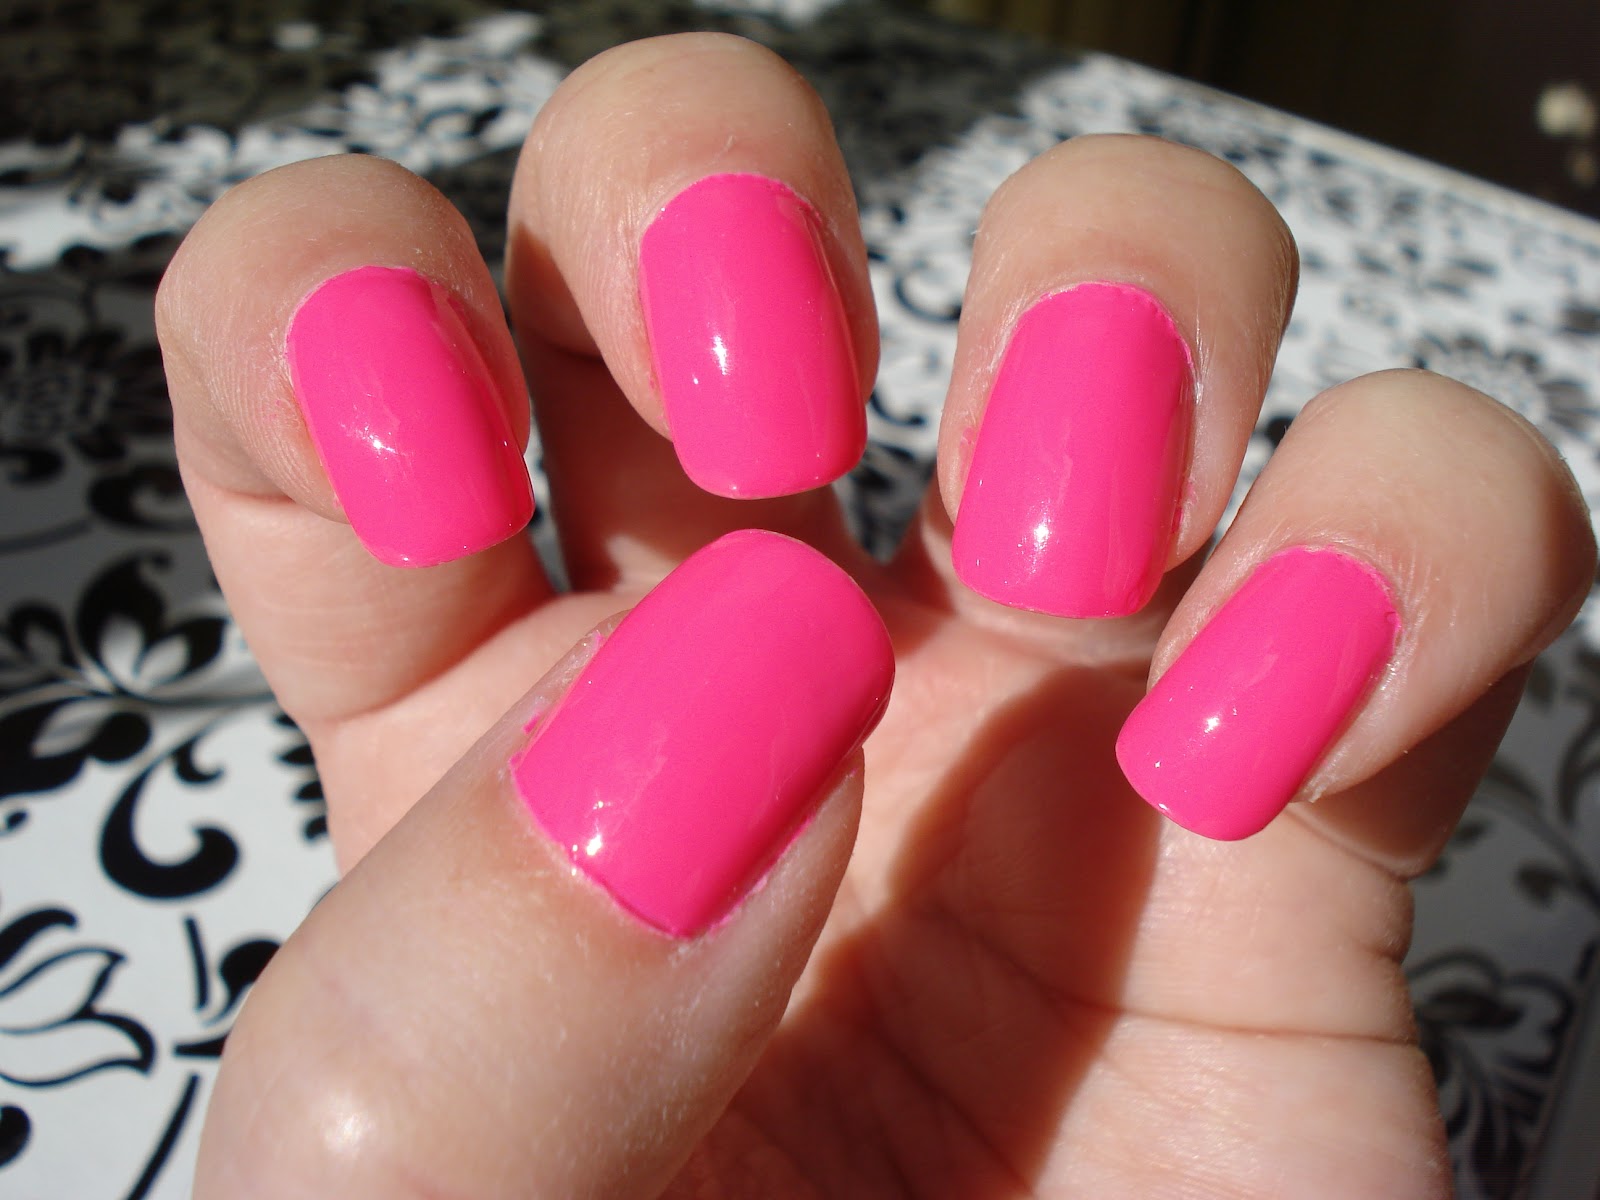 5. Orly Nail Lacquer, Beach Cruiser - wide 8